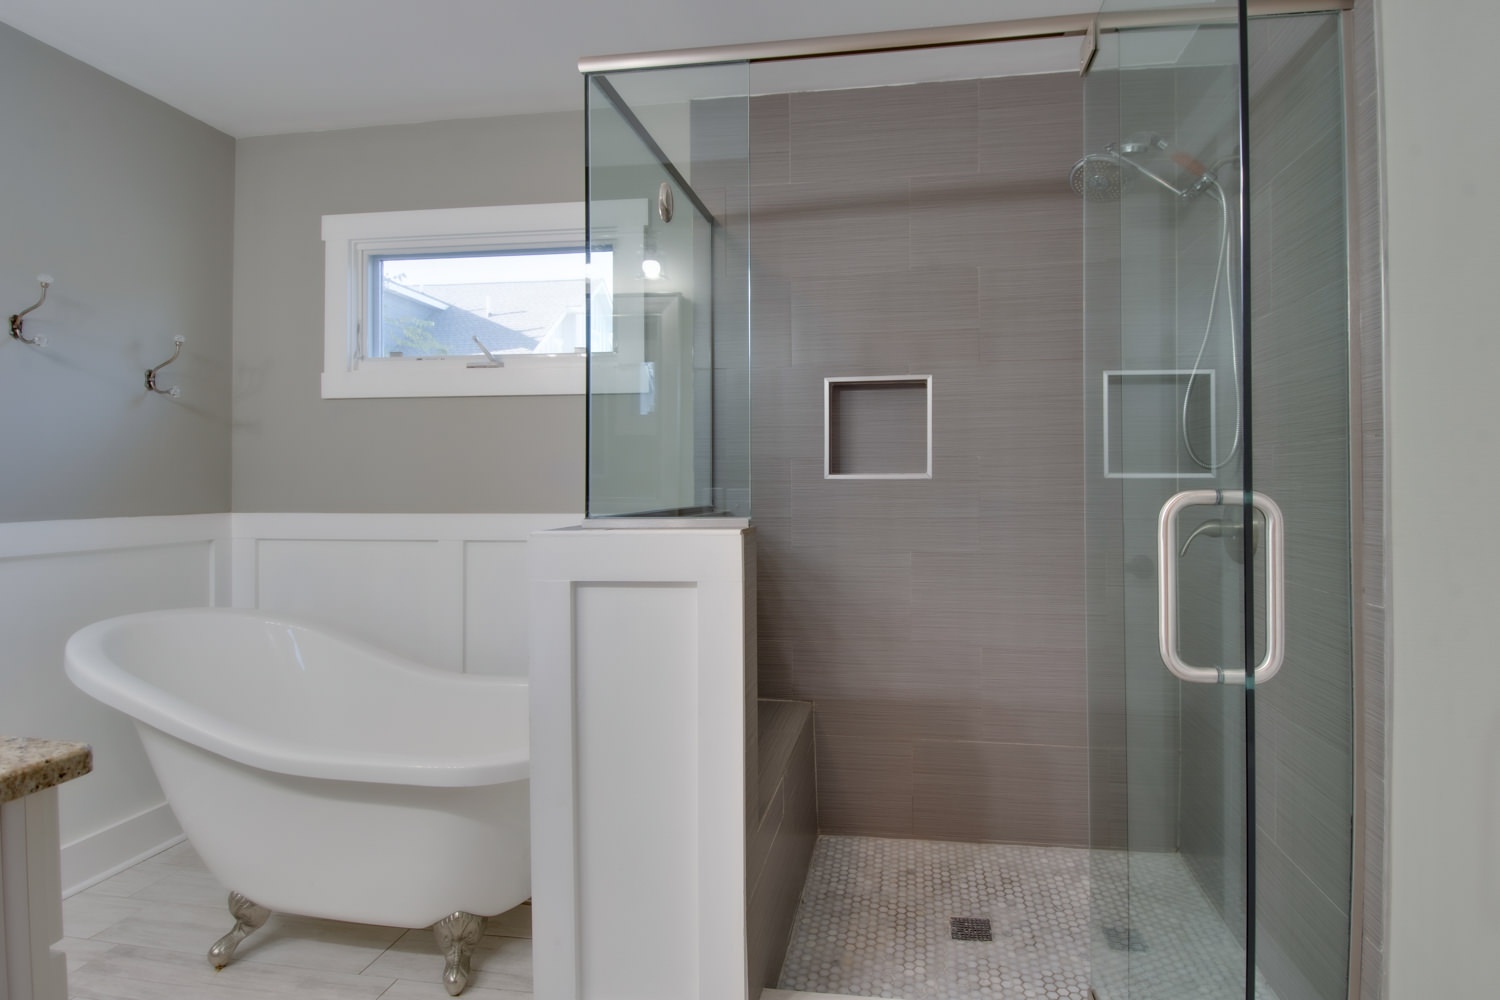 Master bedroom en suite with separate claw tub, and stand up shower